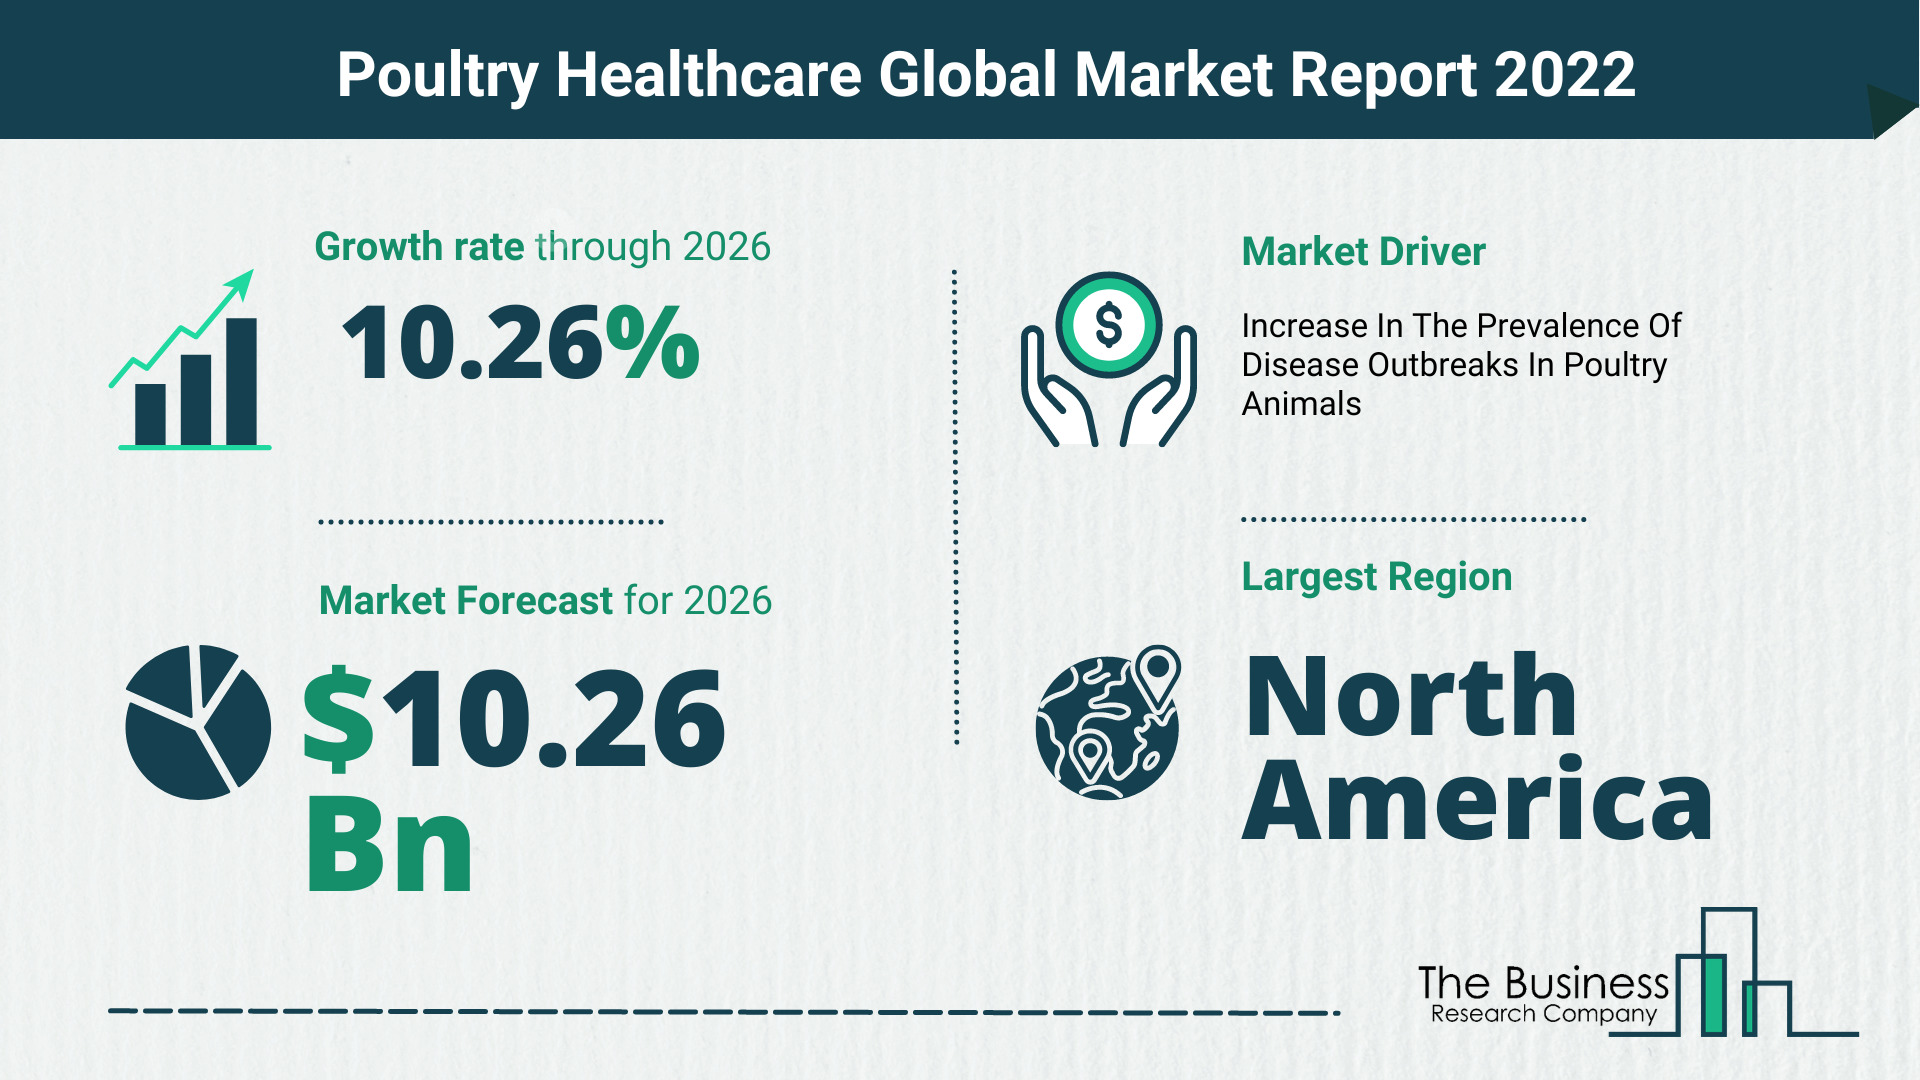 How Will The Poultry Healthcare Market Grow In 2022?